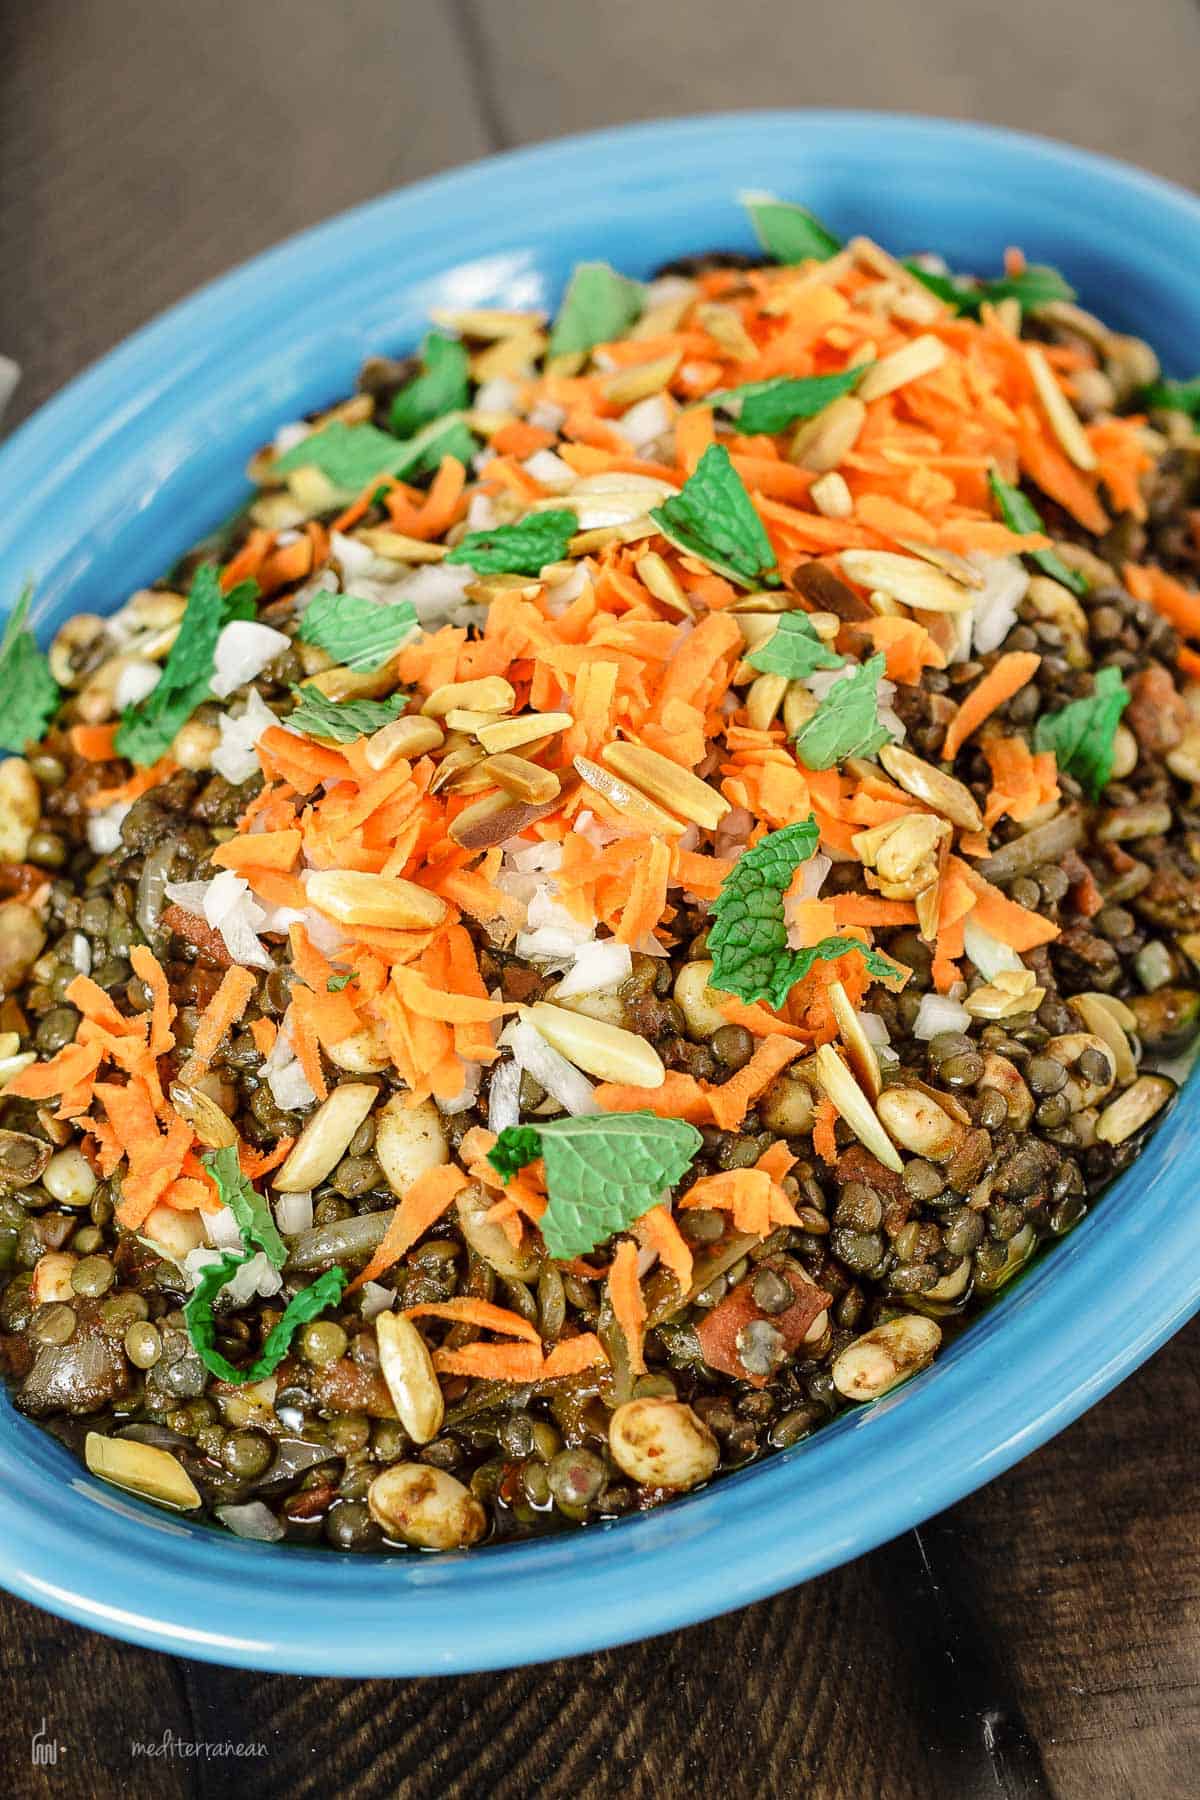 spicy harissa white bean salad with lentils, carrots, mint leaves, and toasted slivered almonds